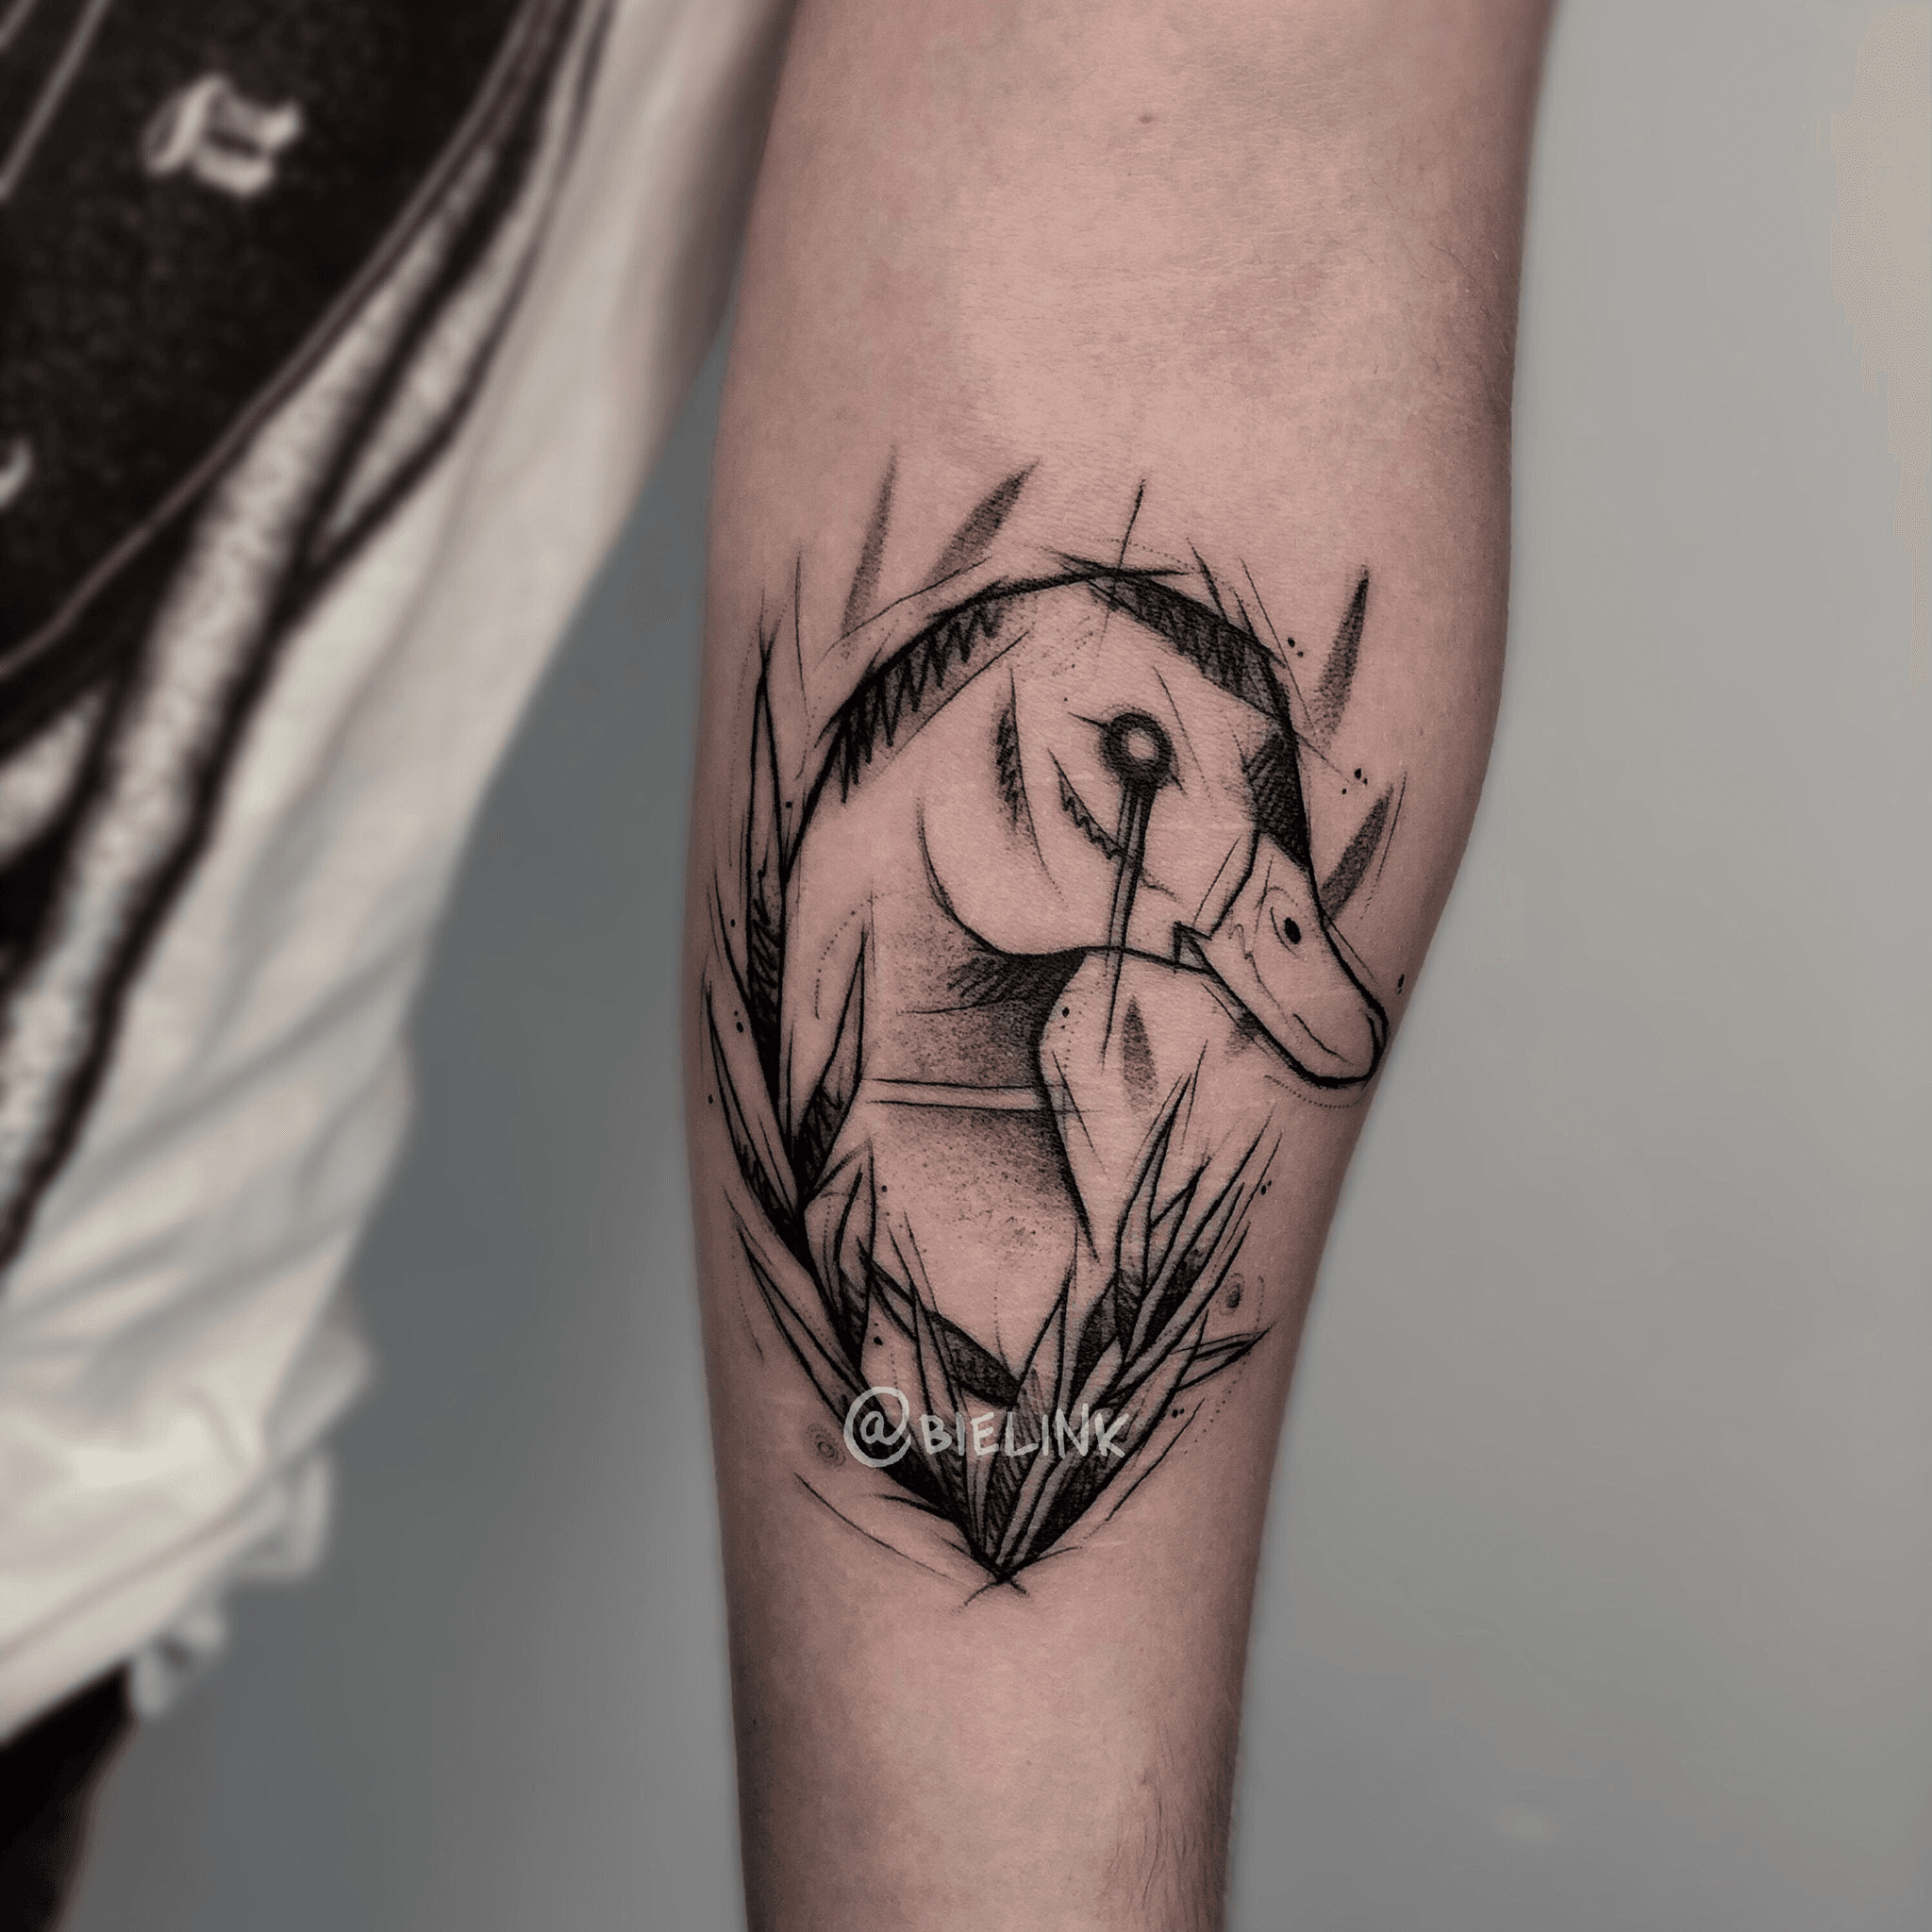 First tattoo Duck emblem with fish hook and deer rackboonduxtattoo   Hook tattoos Tattoos Fishing hook tattoo